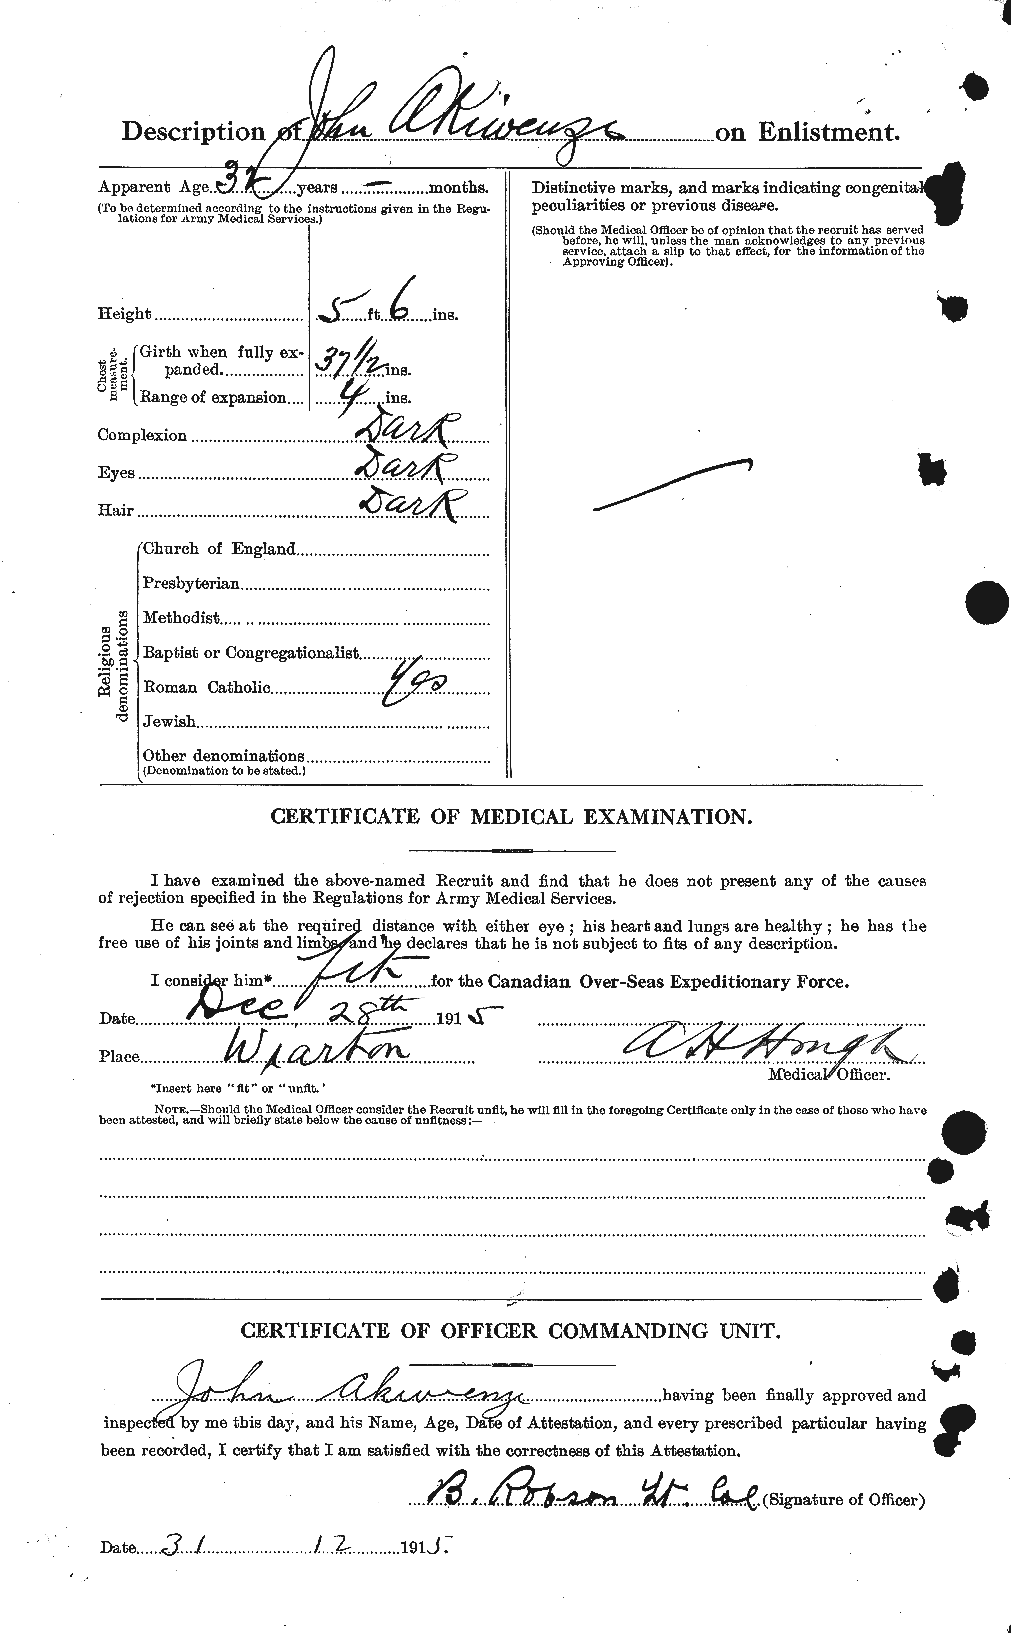 Personnel Records of the First World War - CEF 203590b